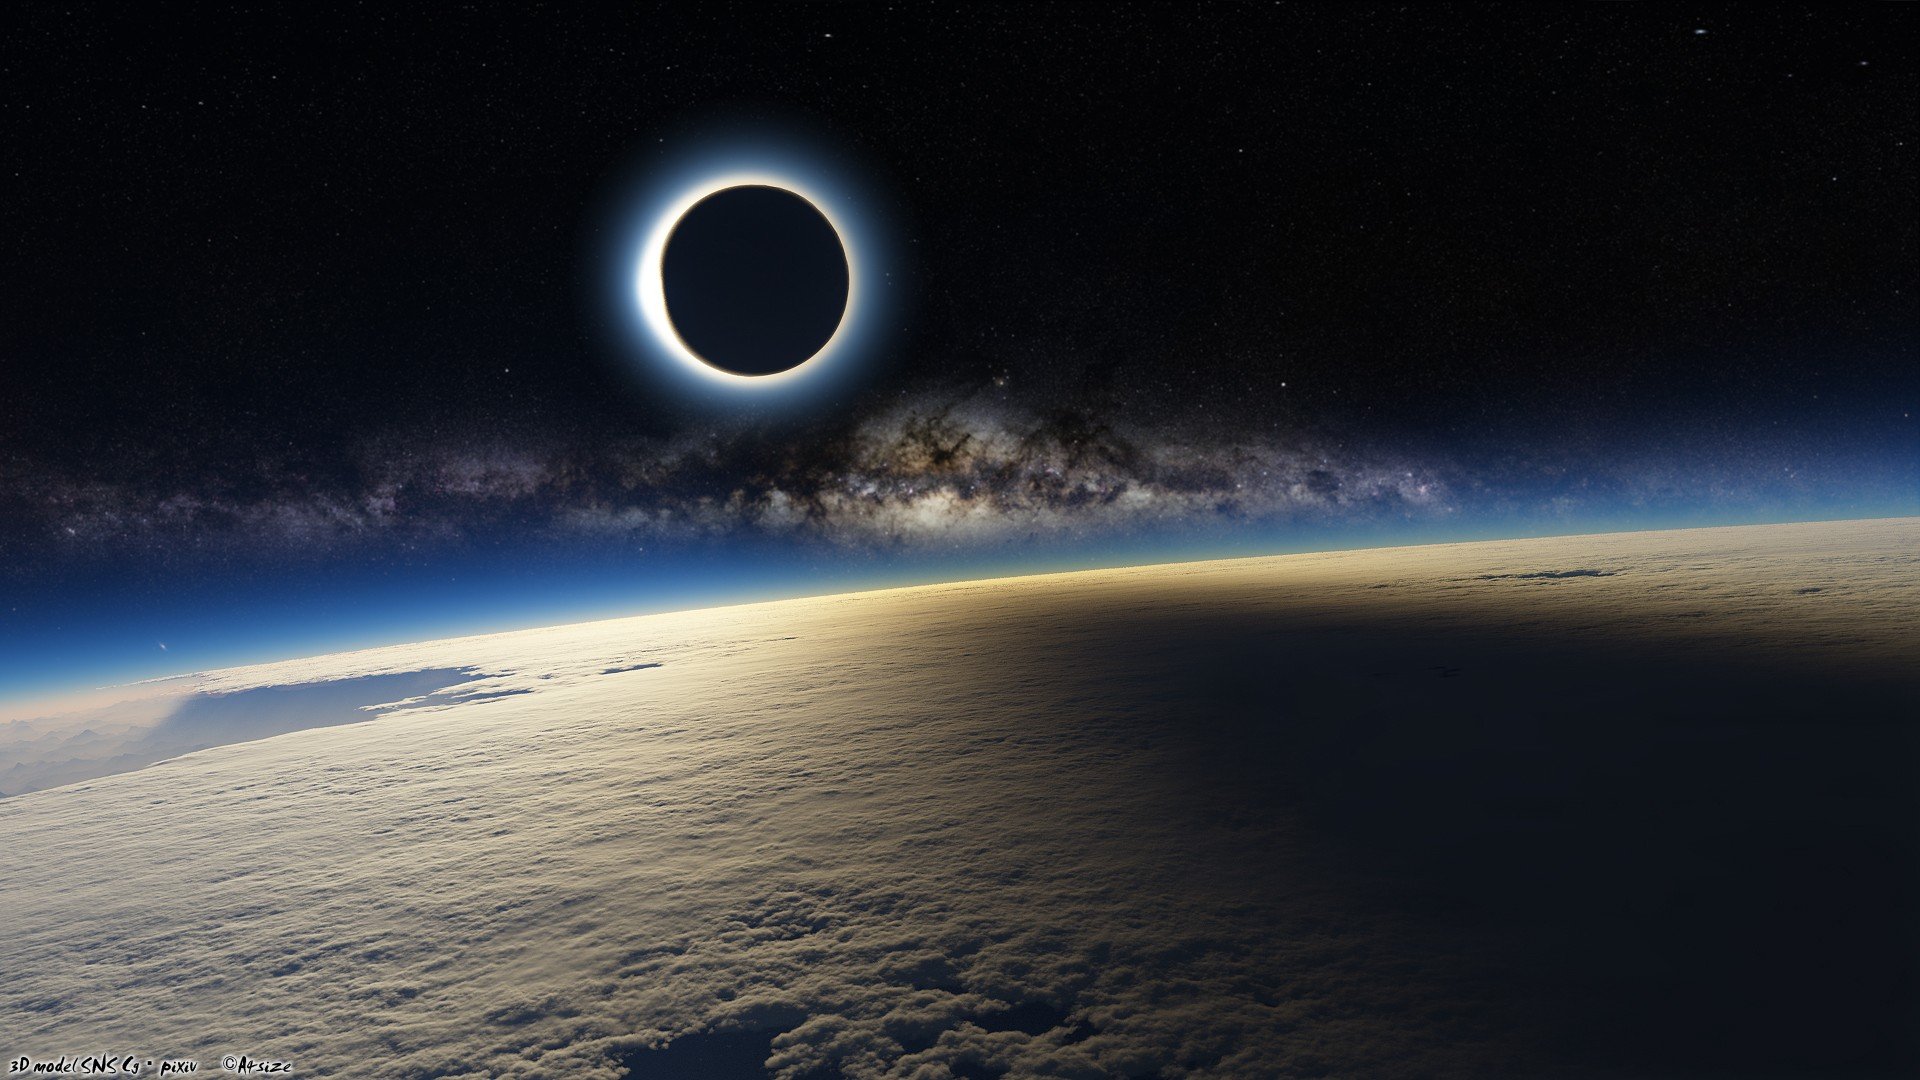 sun, Outer, Space, Stars, Galaxies, Moon, Earth, Eclipse, Skyscapes, Solar, Eclipse Wallpaper